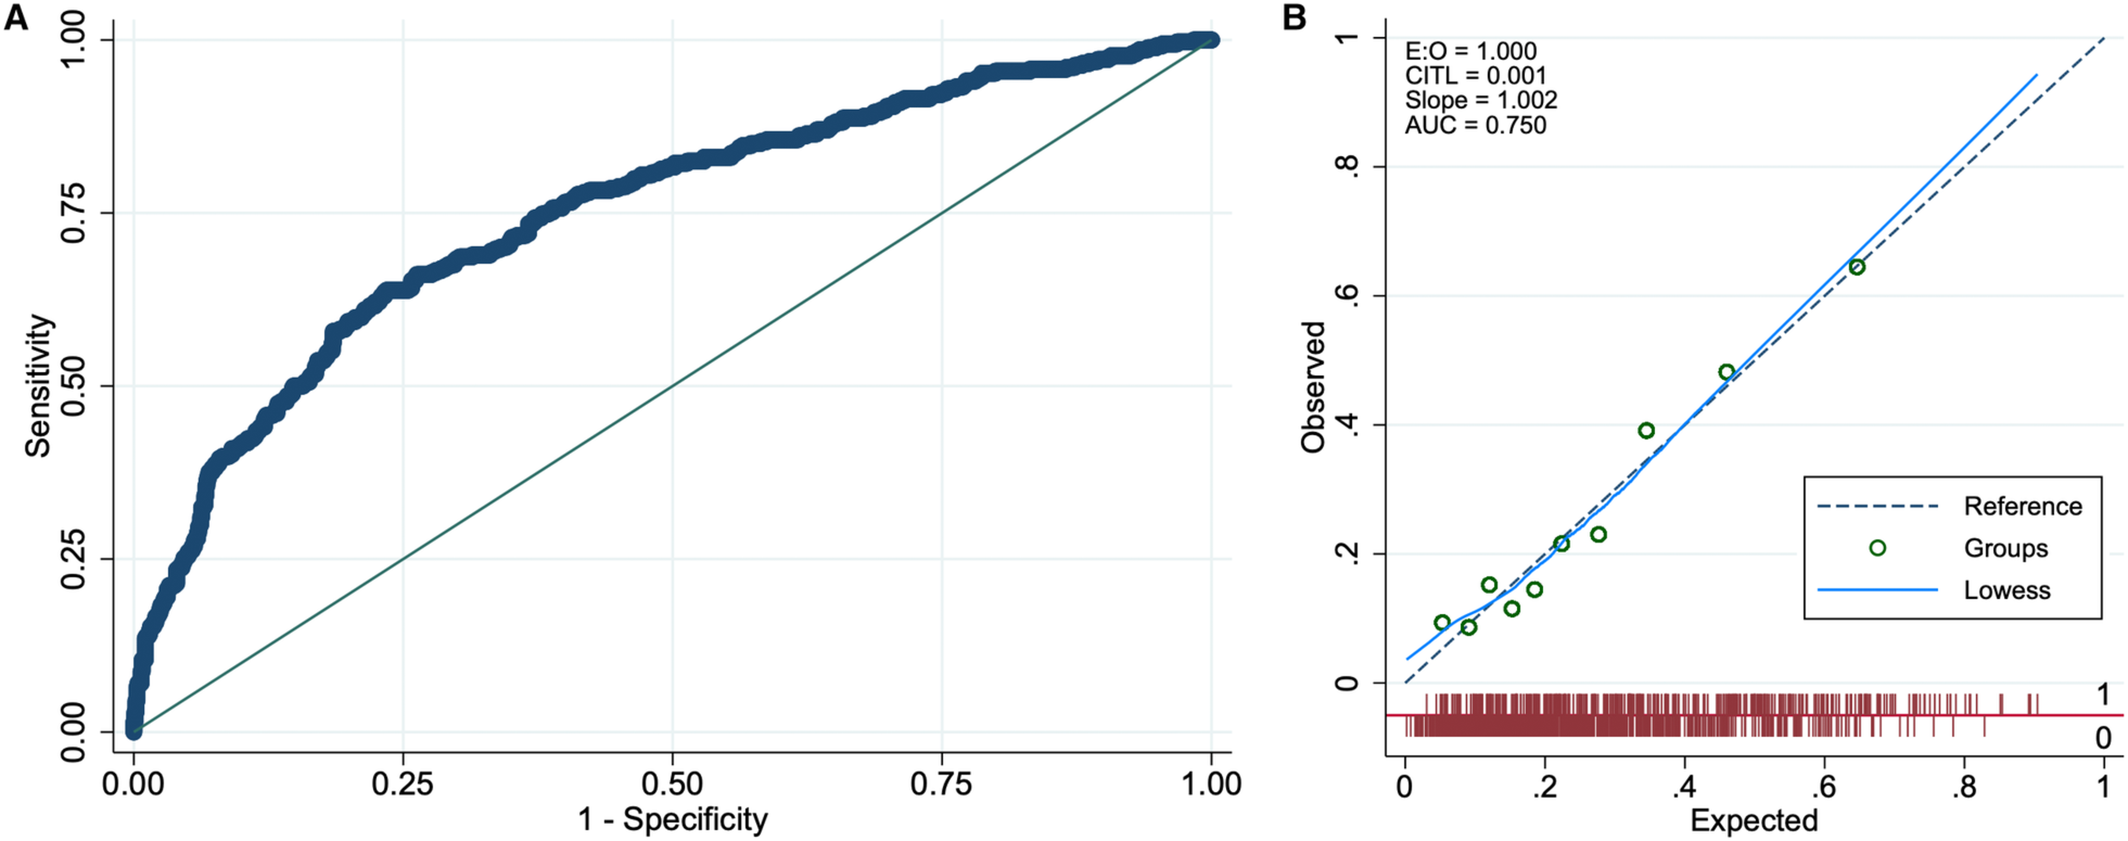 Preoperative Factors Predict Memory Decline After Coronary Artery Bypass Grafting or Percutaneous Coronary Intervention in an Epidemiological Cohort of Older Adults